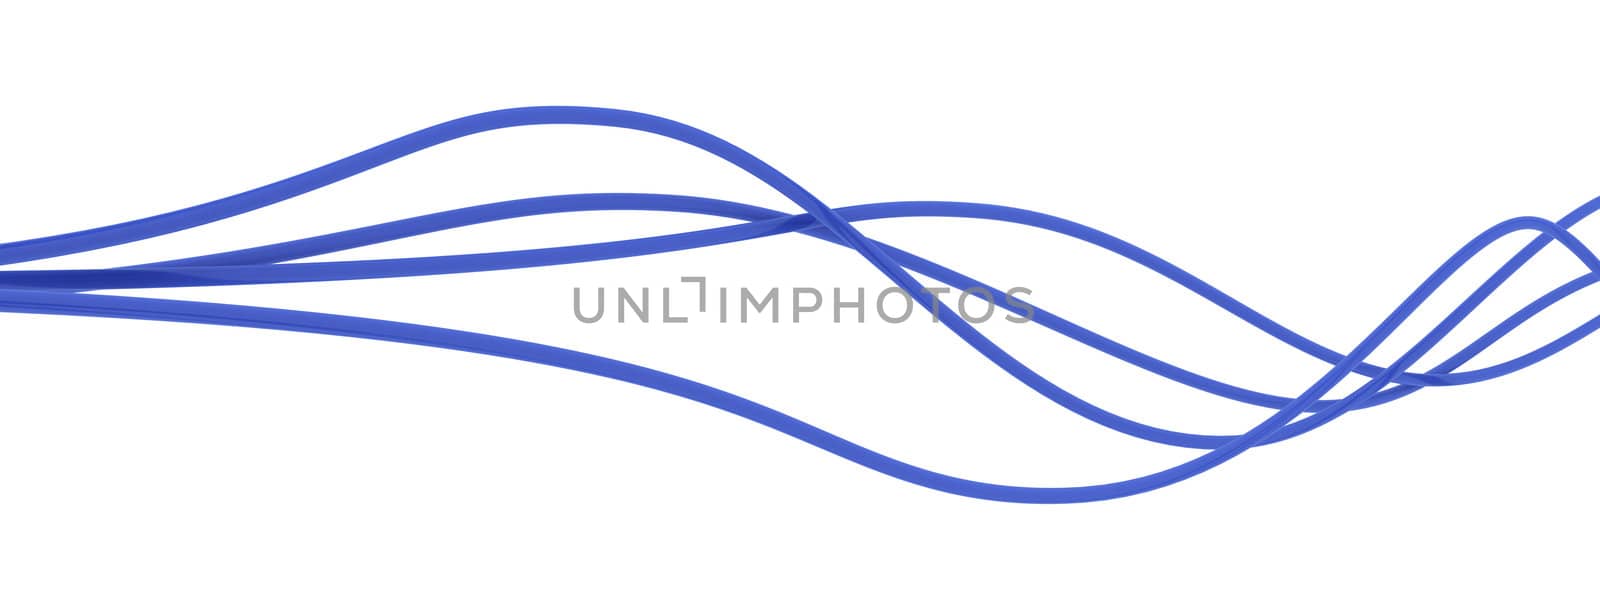 fibre-optical blue cables on a white background